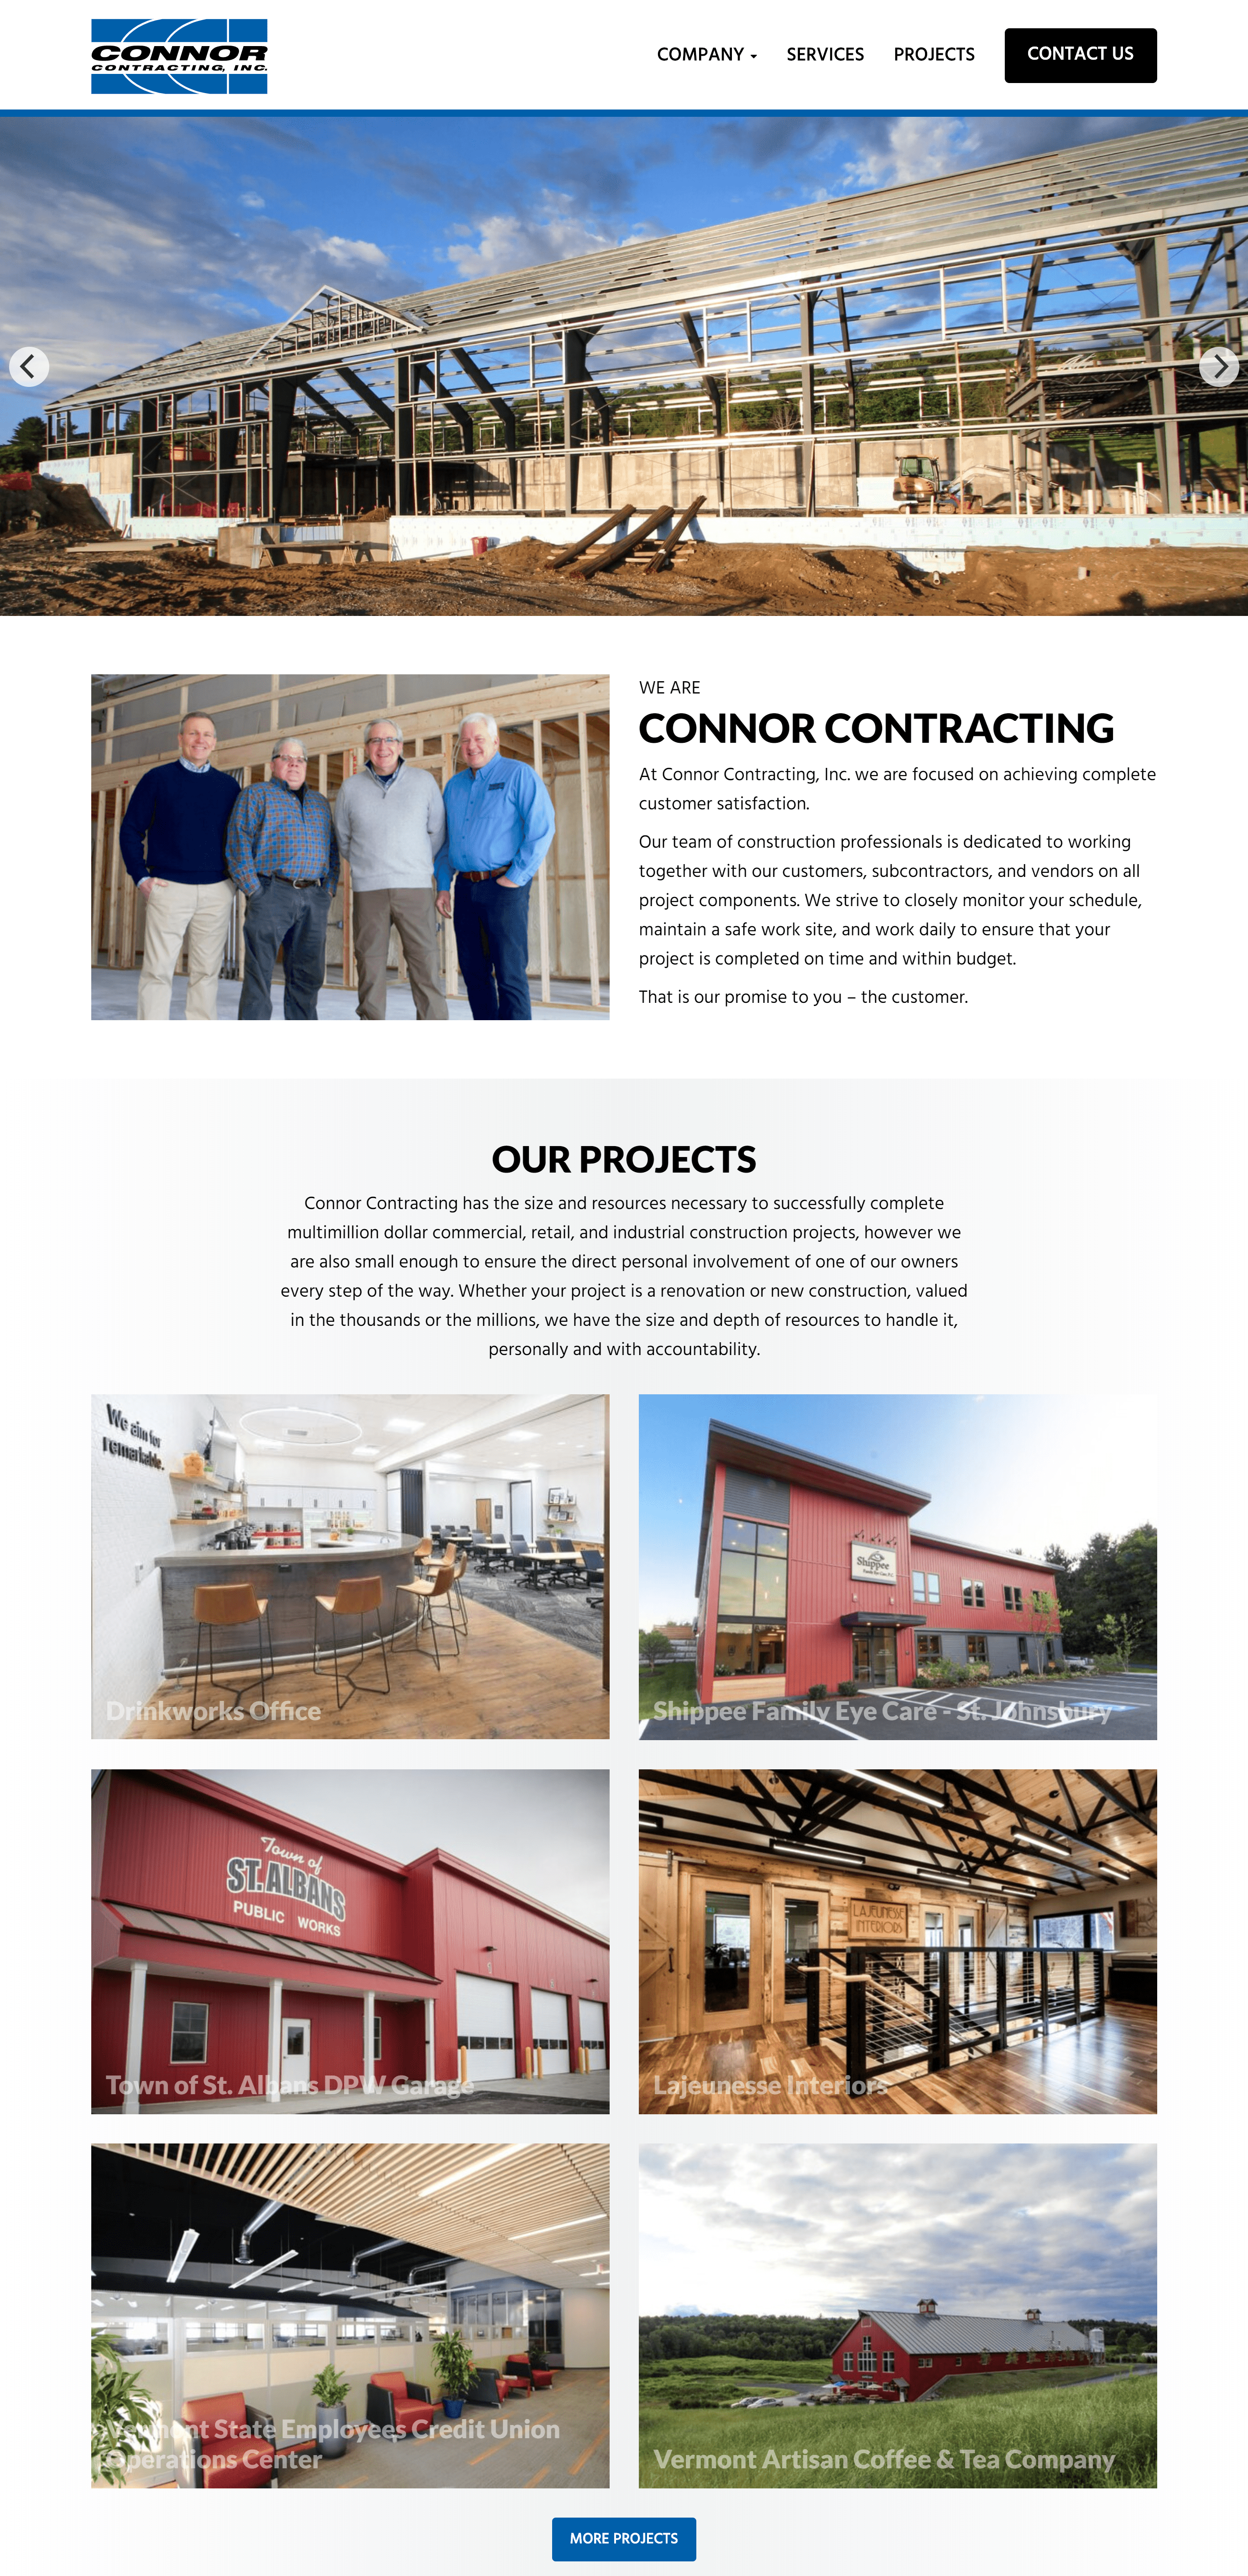 Connor Contracting